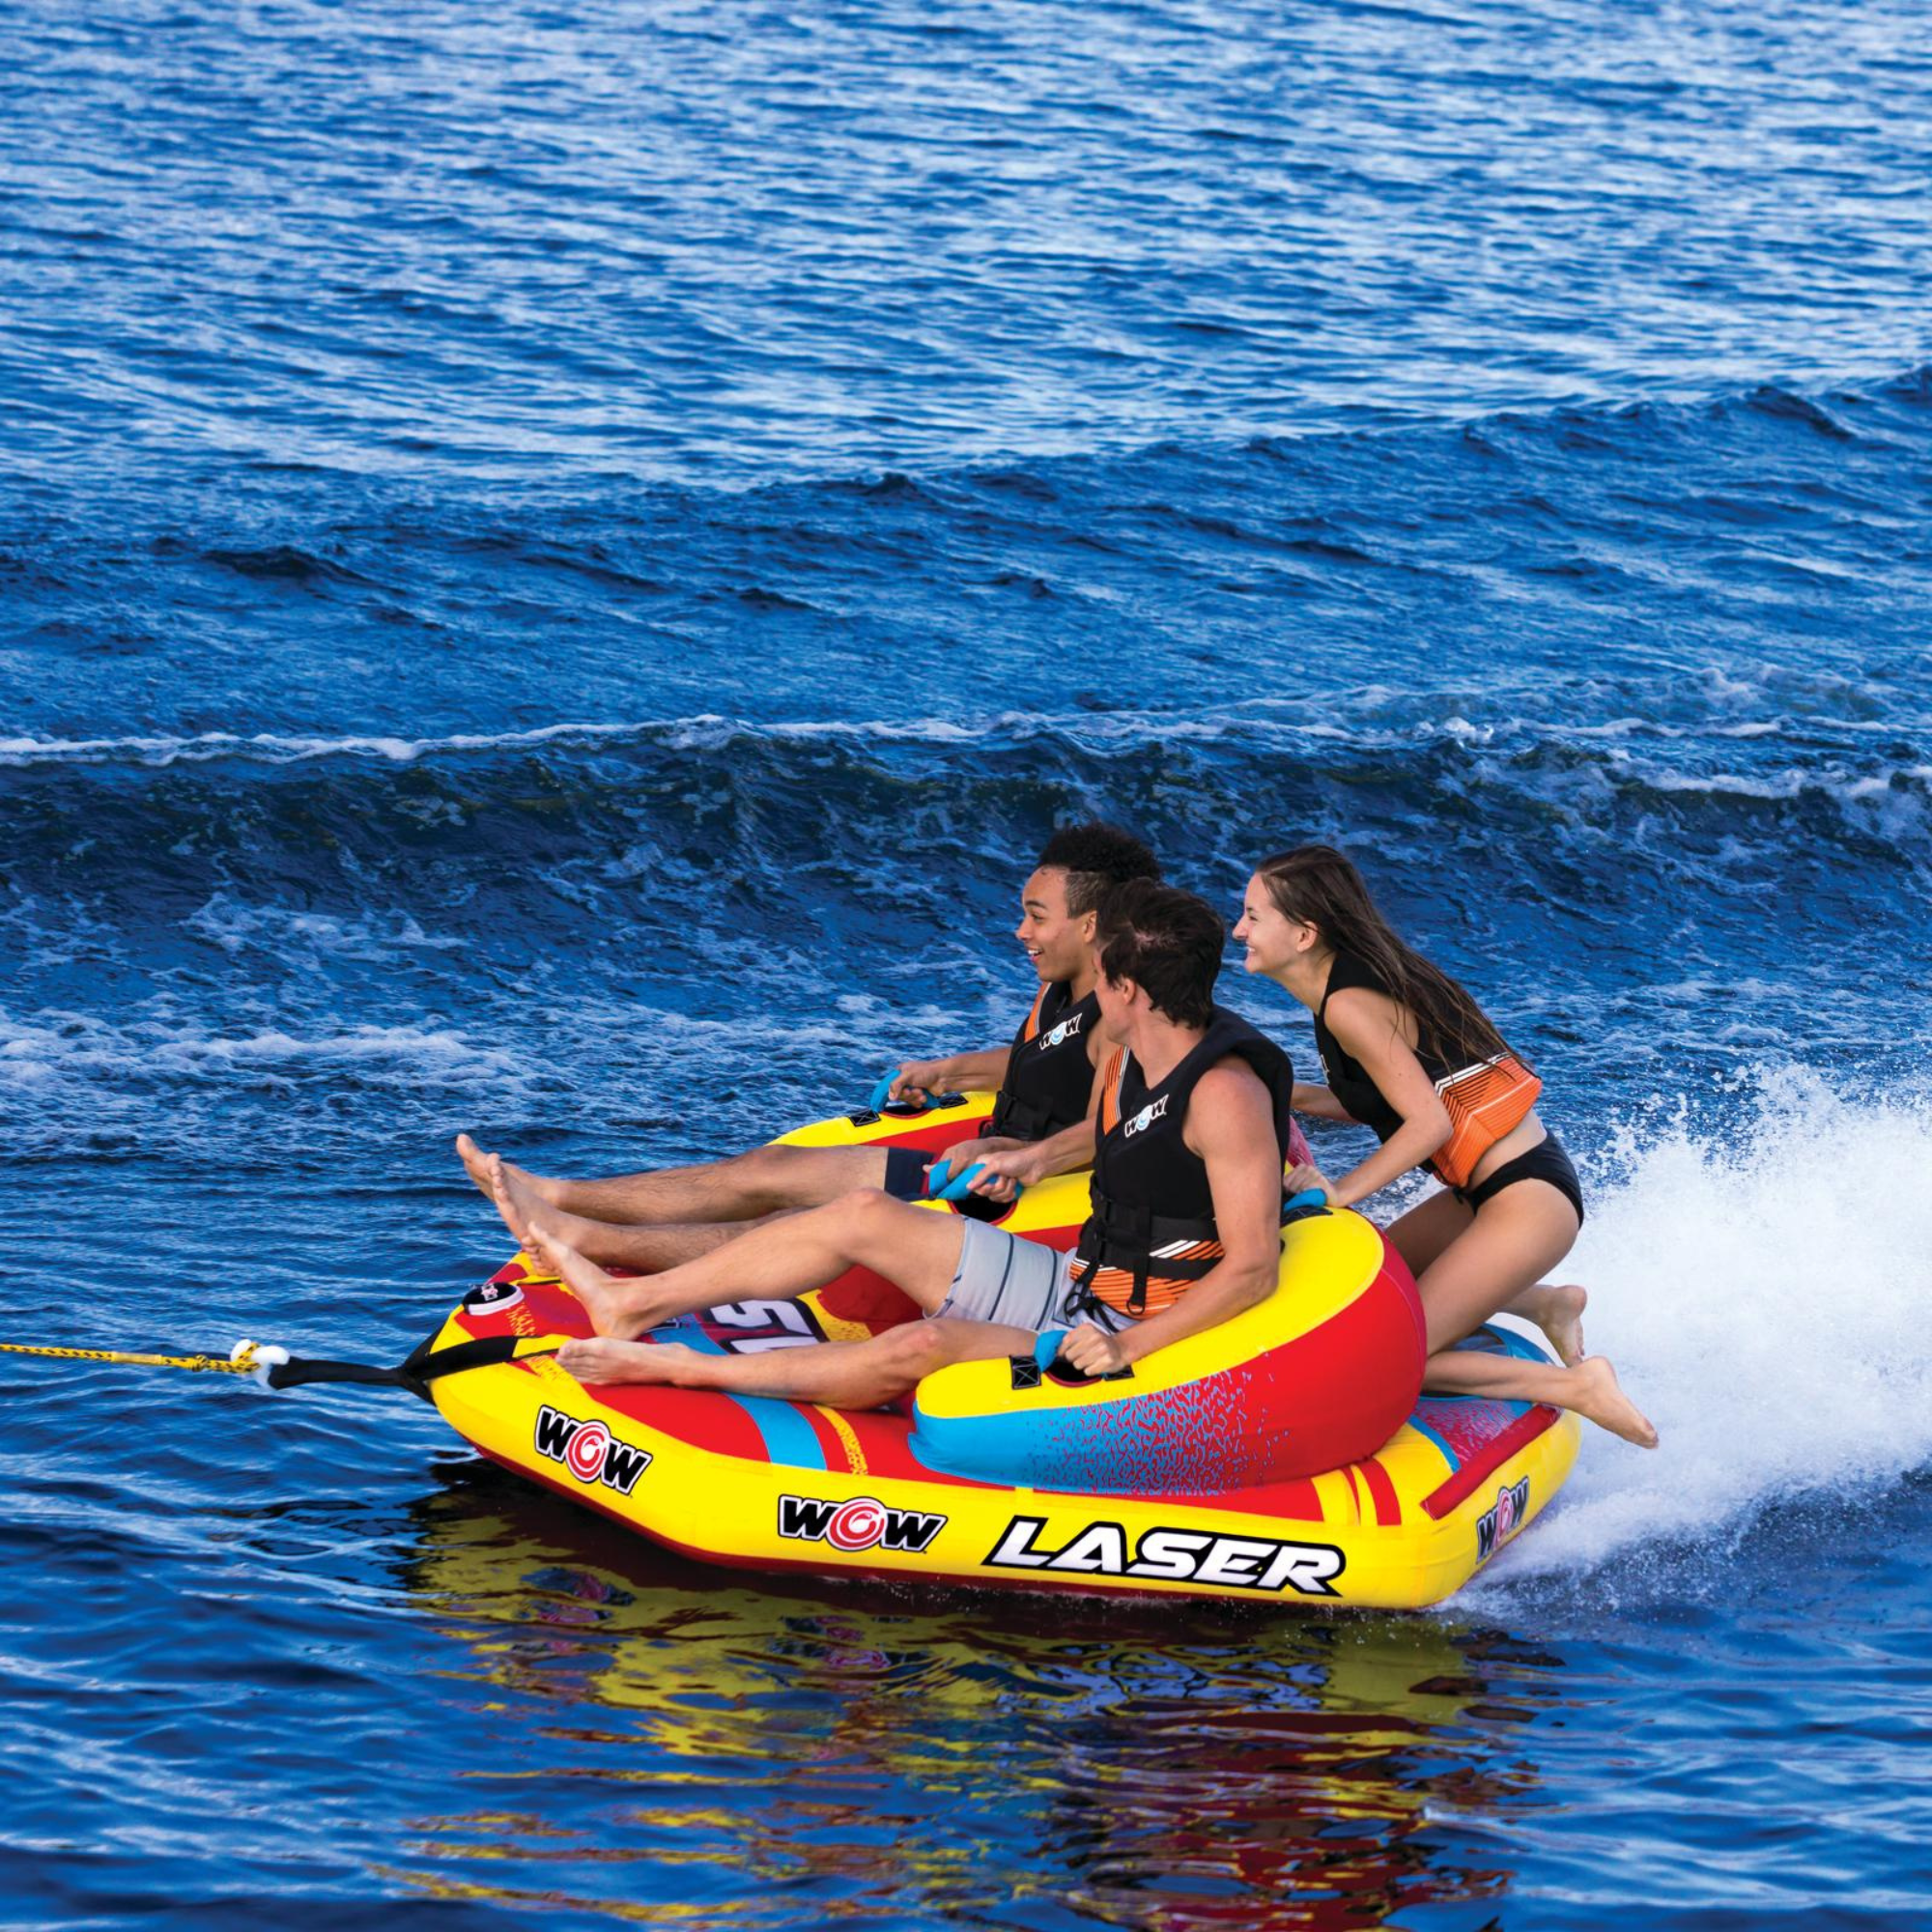 WOW World of Watersports WOW Sports Laser 3-Person Towable